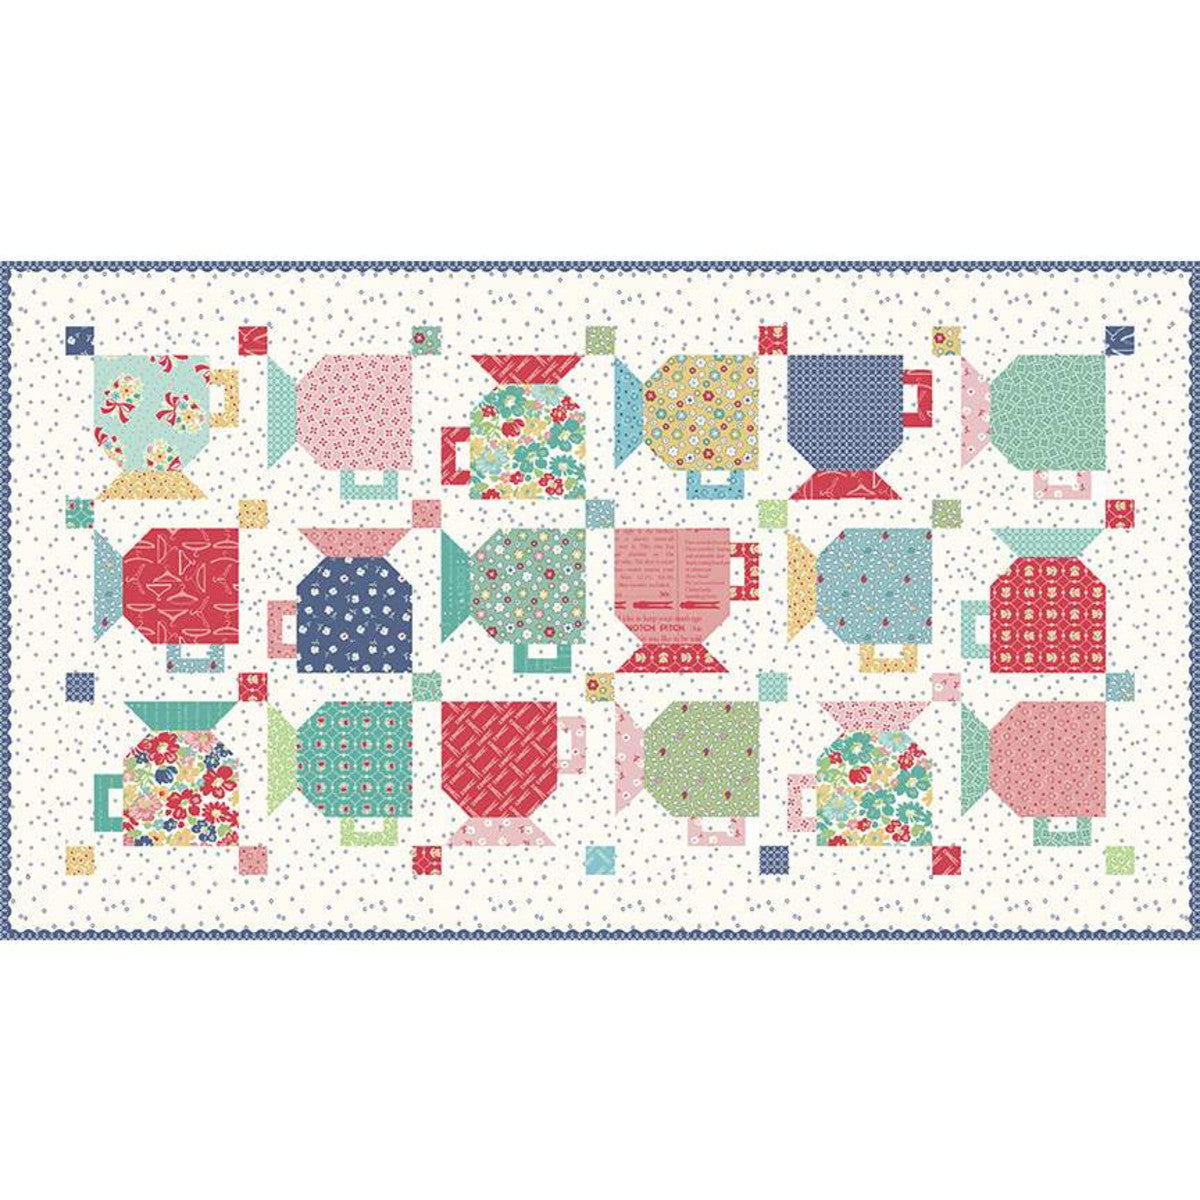 PATTERN, GOOD MORNING MUG Table Runner Quilt Pattern by Lori Holt of Bee in my Bonnet